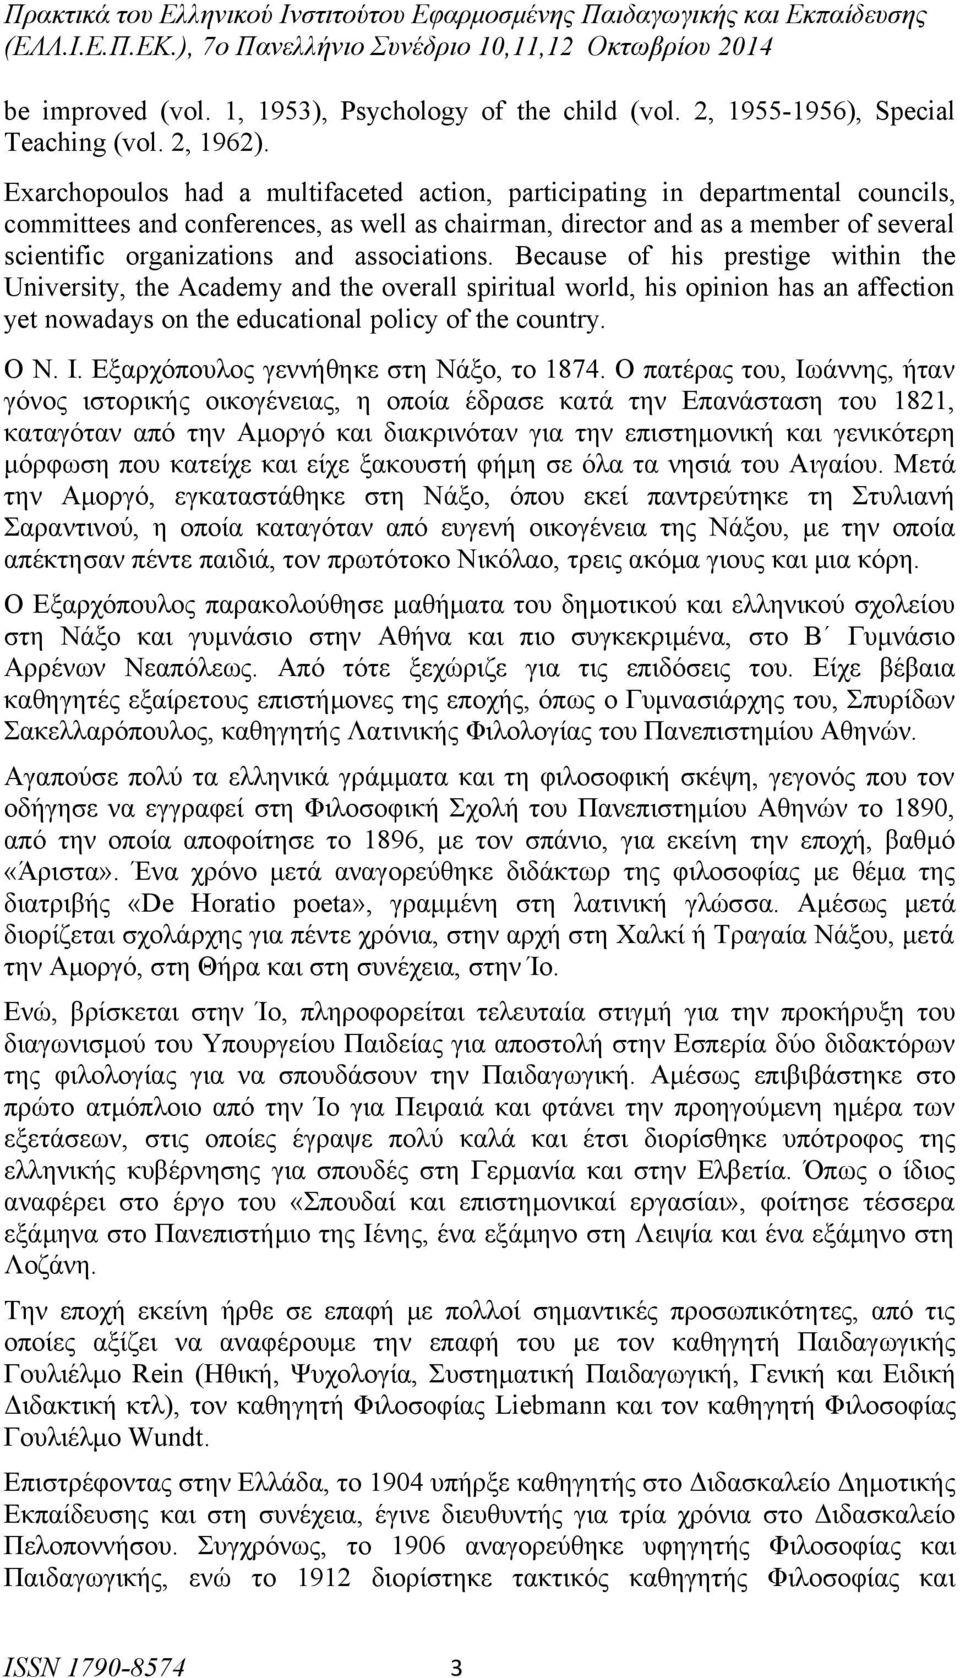 associations. Because of his prestige within the University, the Academy and the overall spiritual world, his opinion has an affection yet nowadays on the educational policy of the country. Ο Ν. Ι.